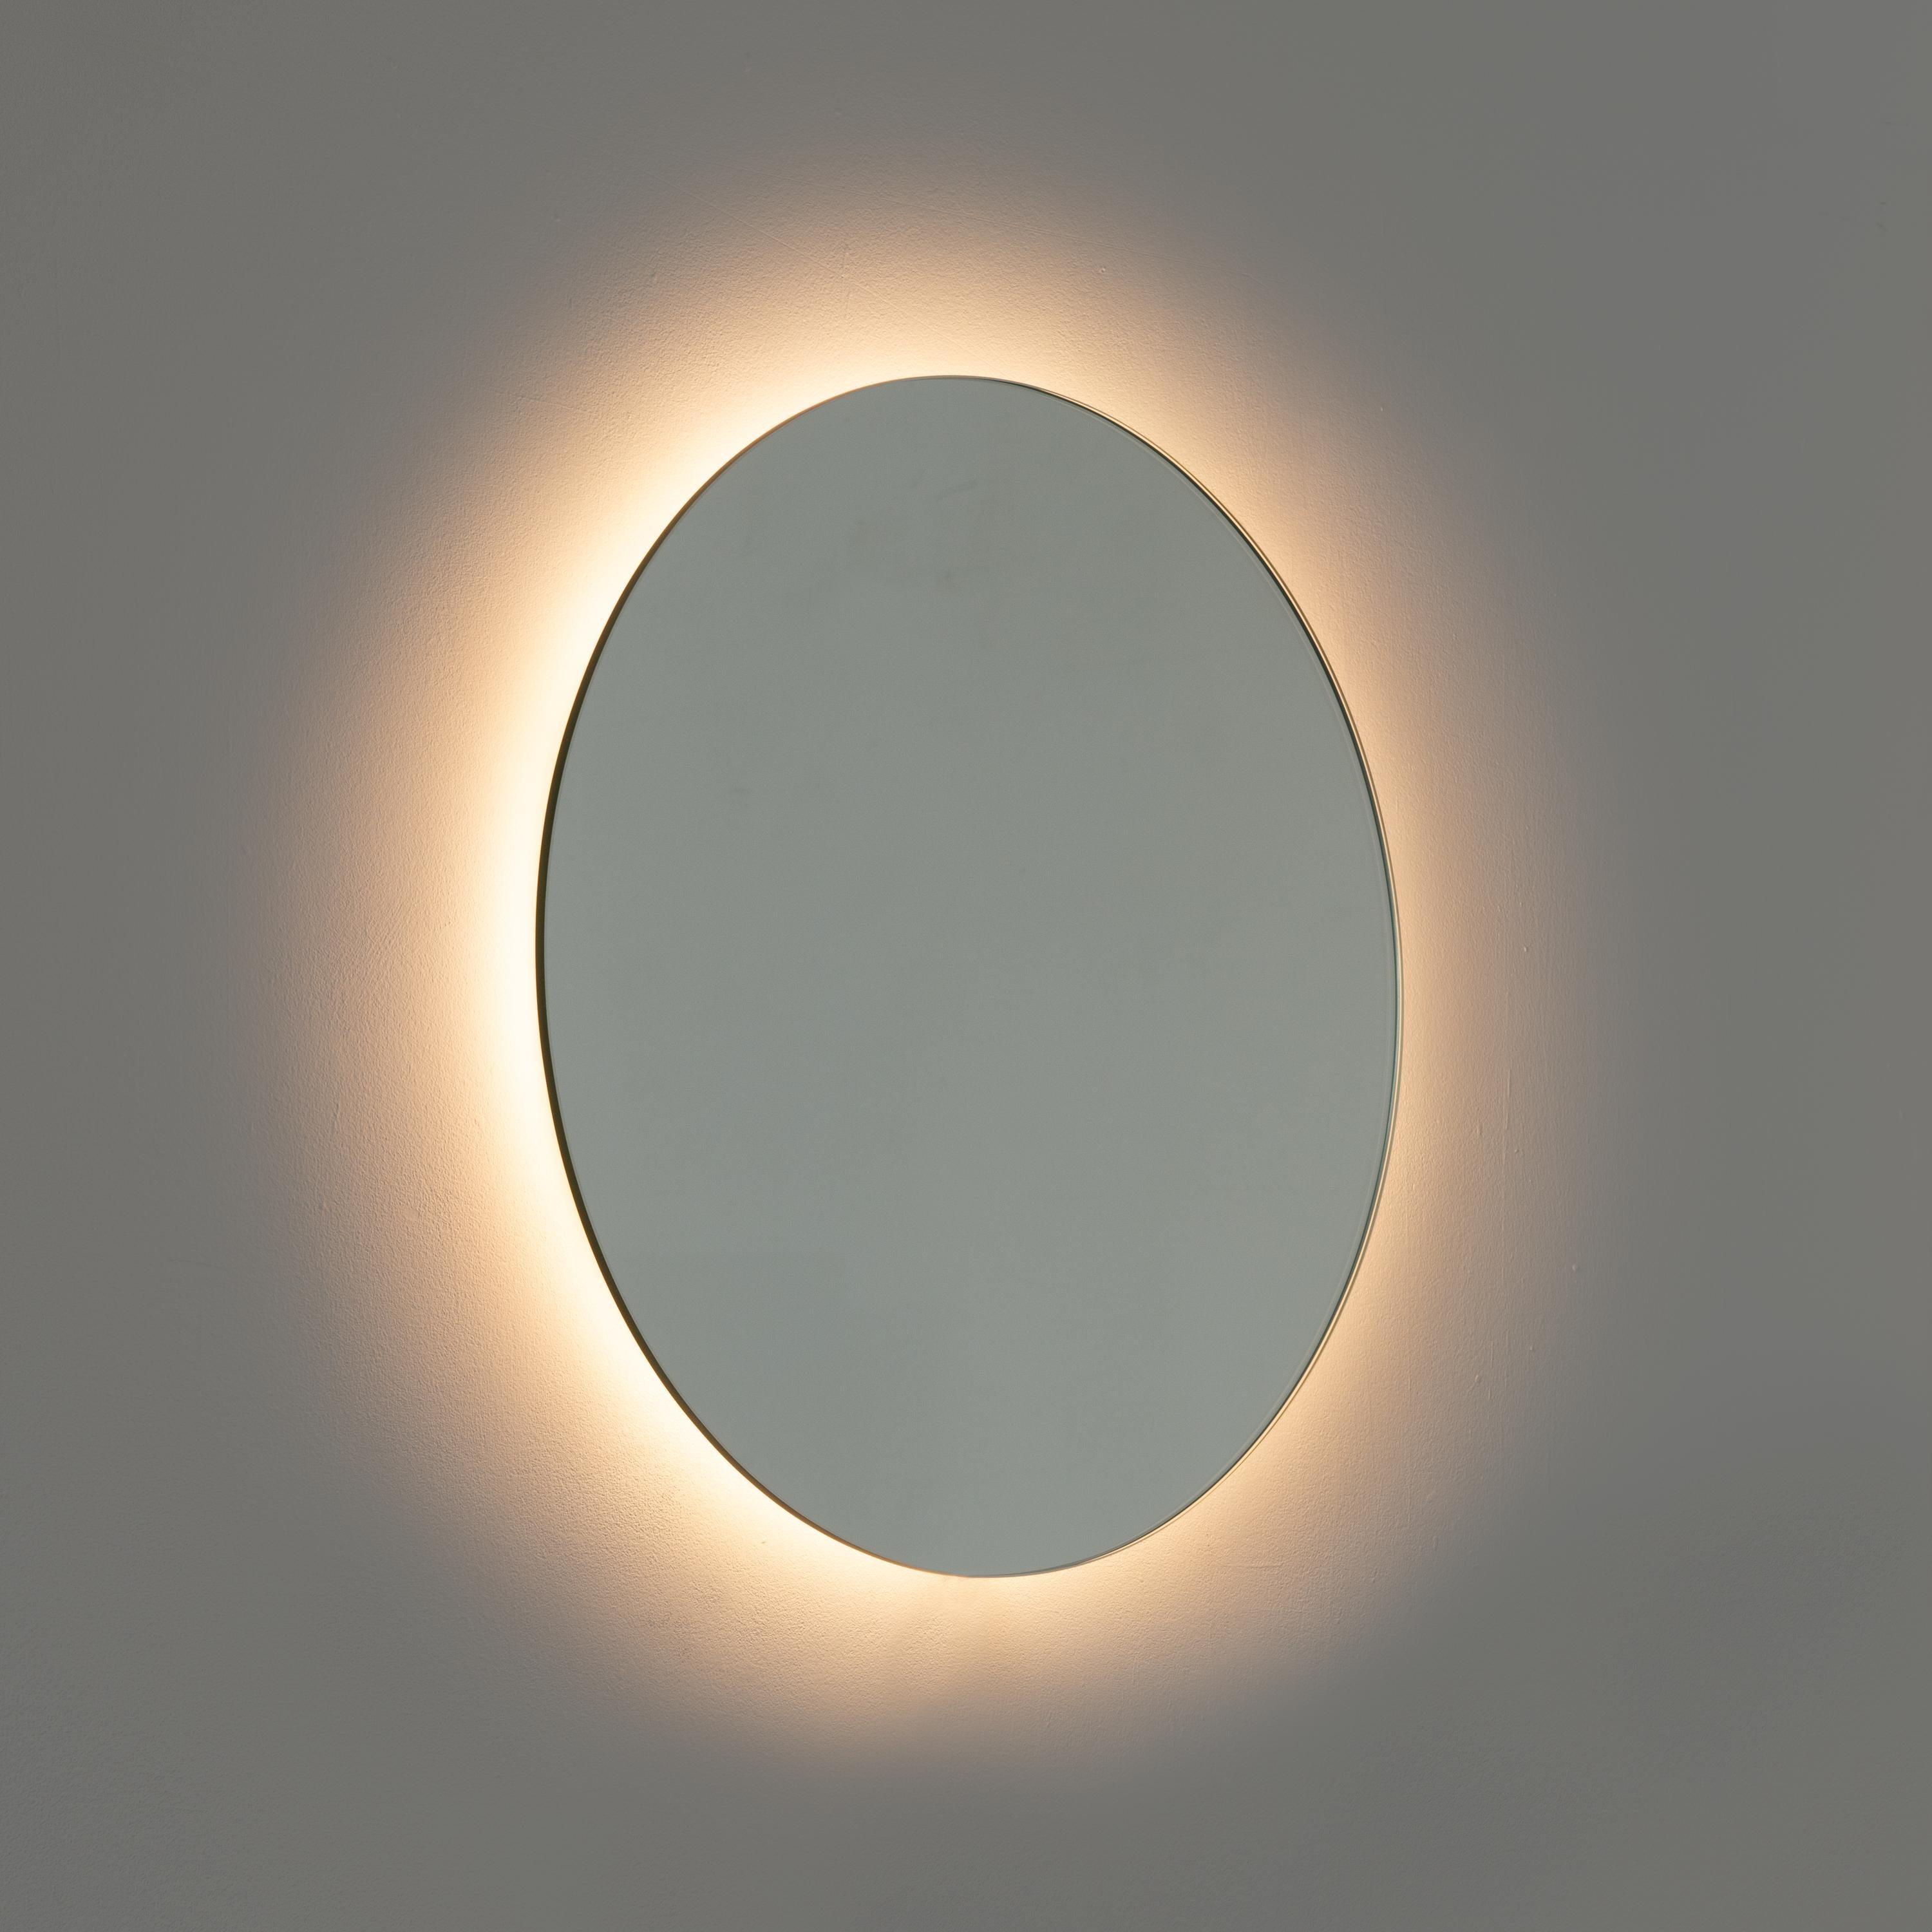 Orbis Back Illuminated Round Contemporary Frameless Mirror, Customisable, Large In New Condition For Sale In London, GB